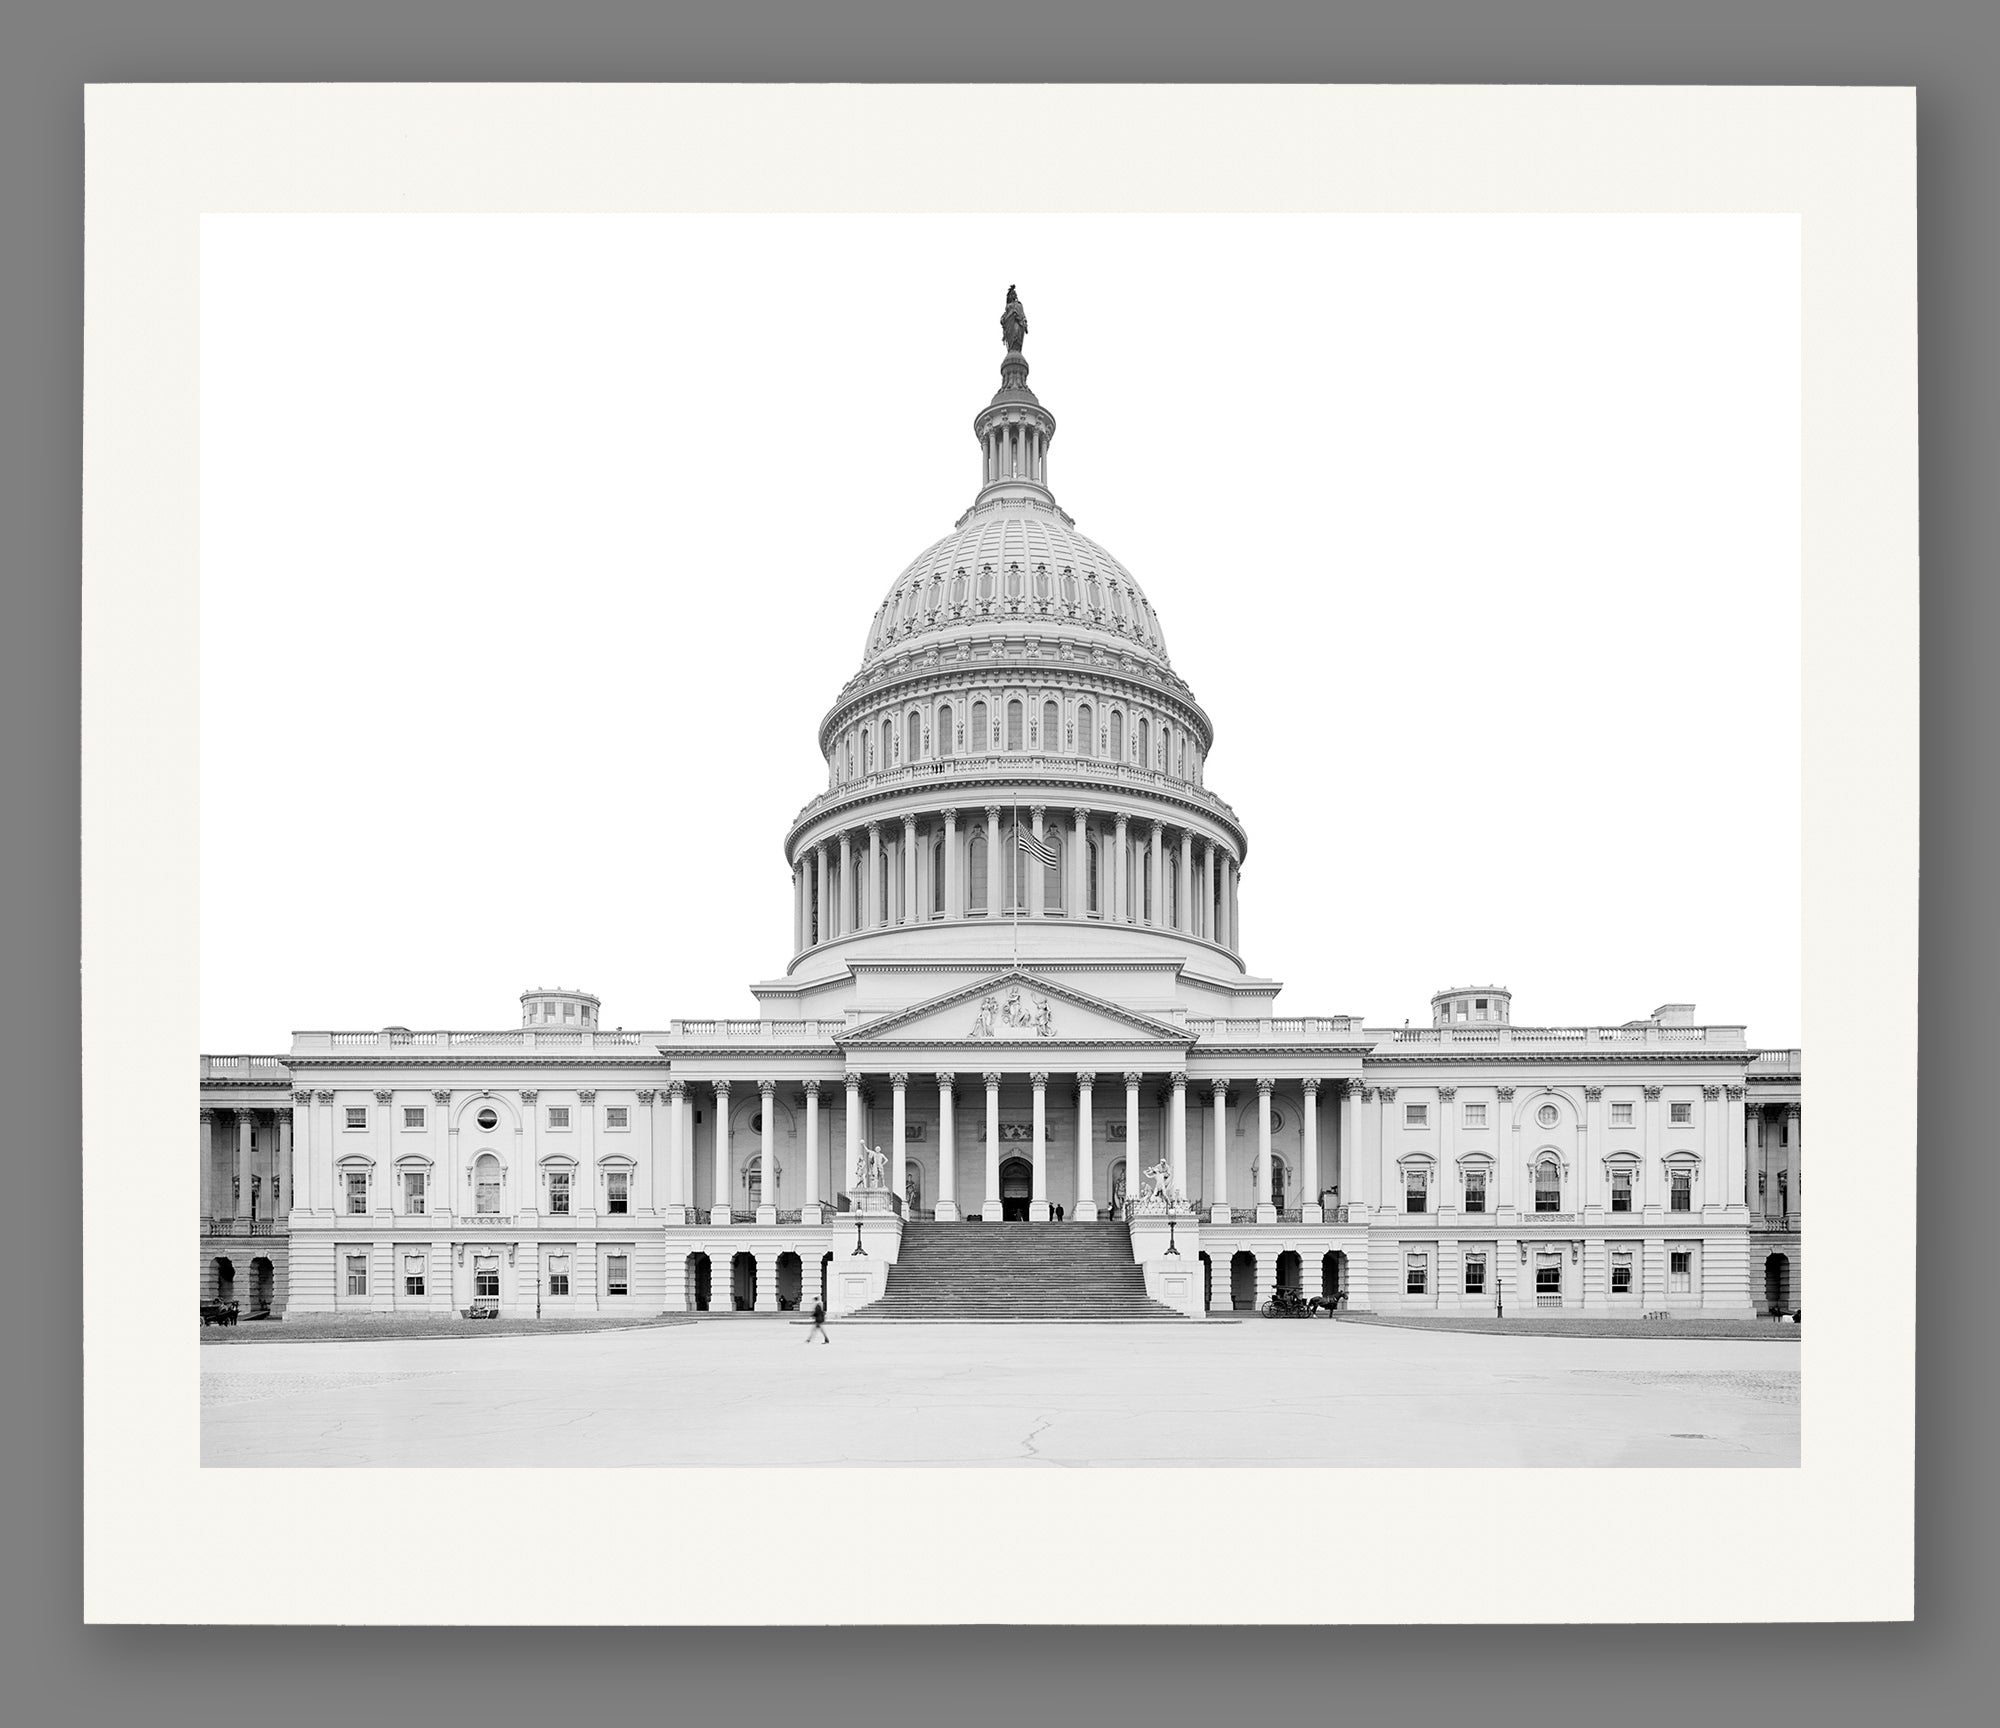 A paper print of a vintage image of the Capitol Building's main entrance